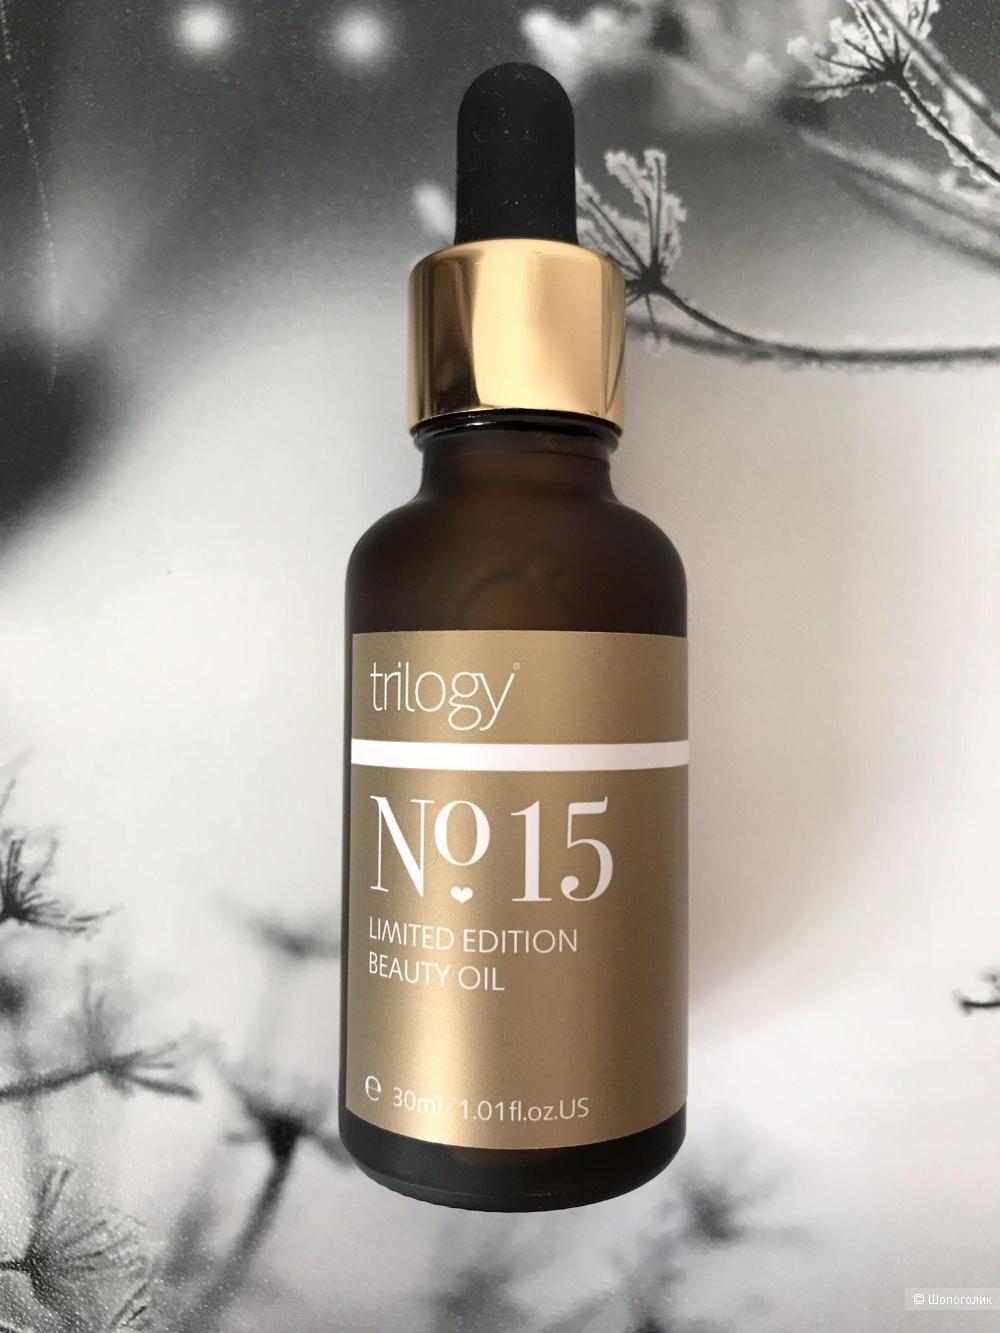 Trilogy No.15 Limited Edition Beauty Oil - 30 ml